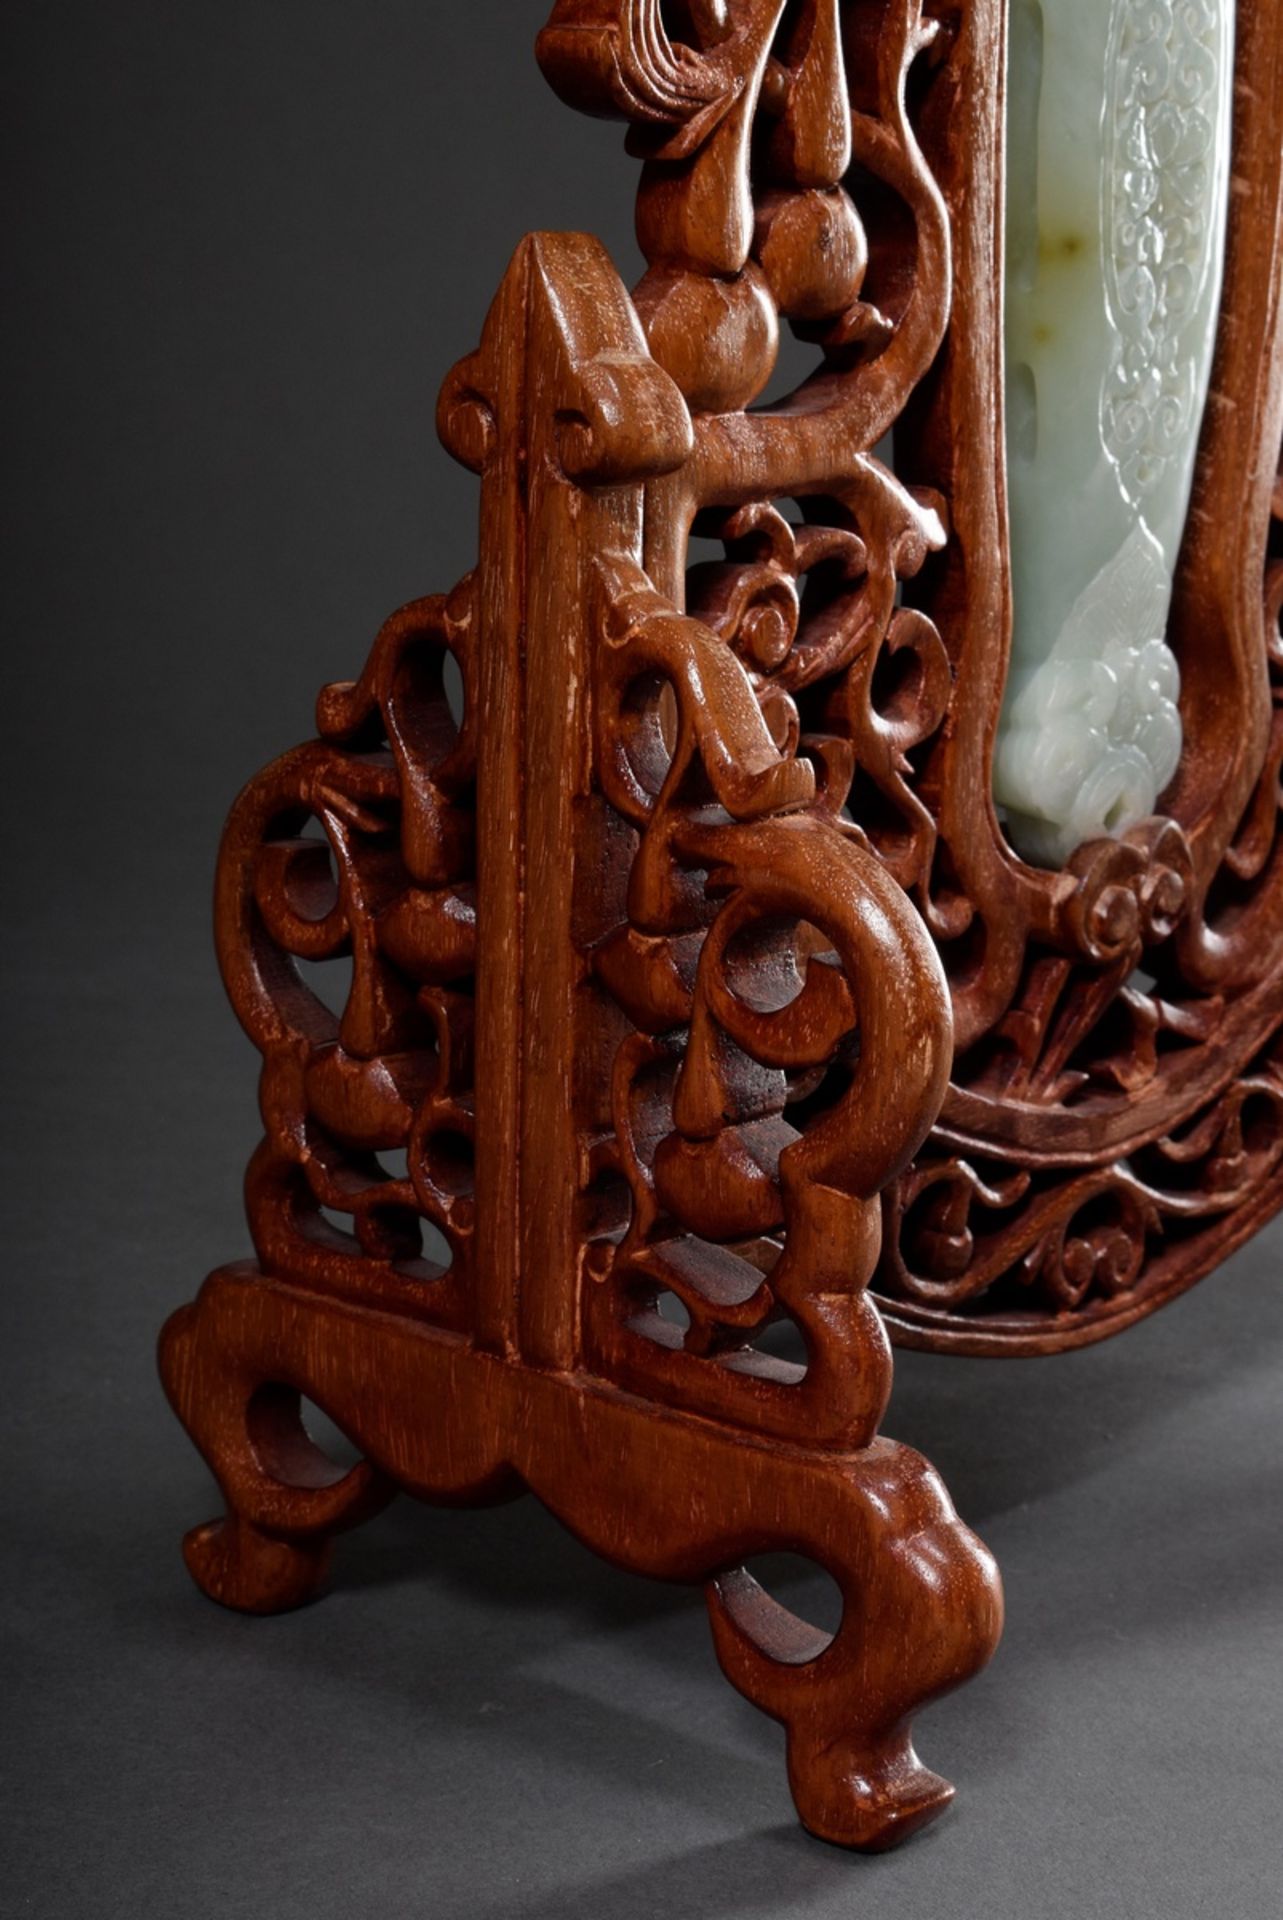 Large Chinese jade carving folding screen in hand mirror or fan form with relief "Two Persons" and  - Image 4 of 8